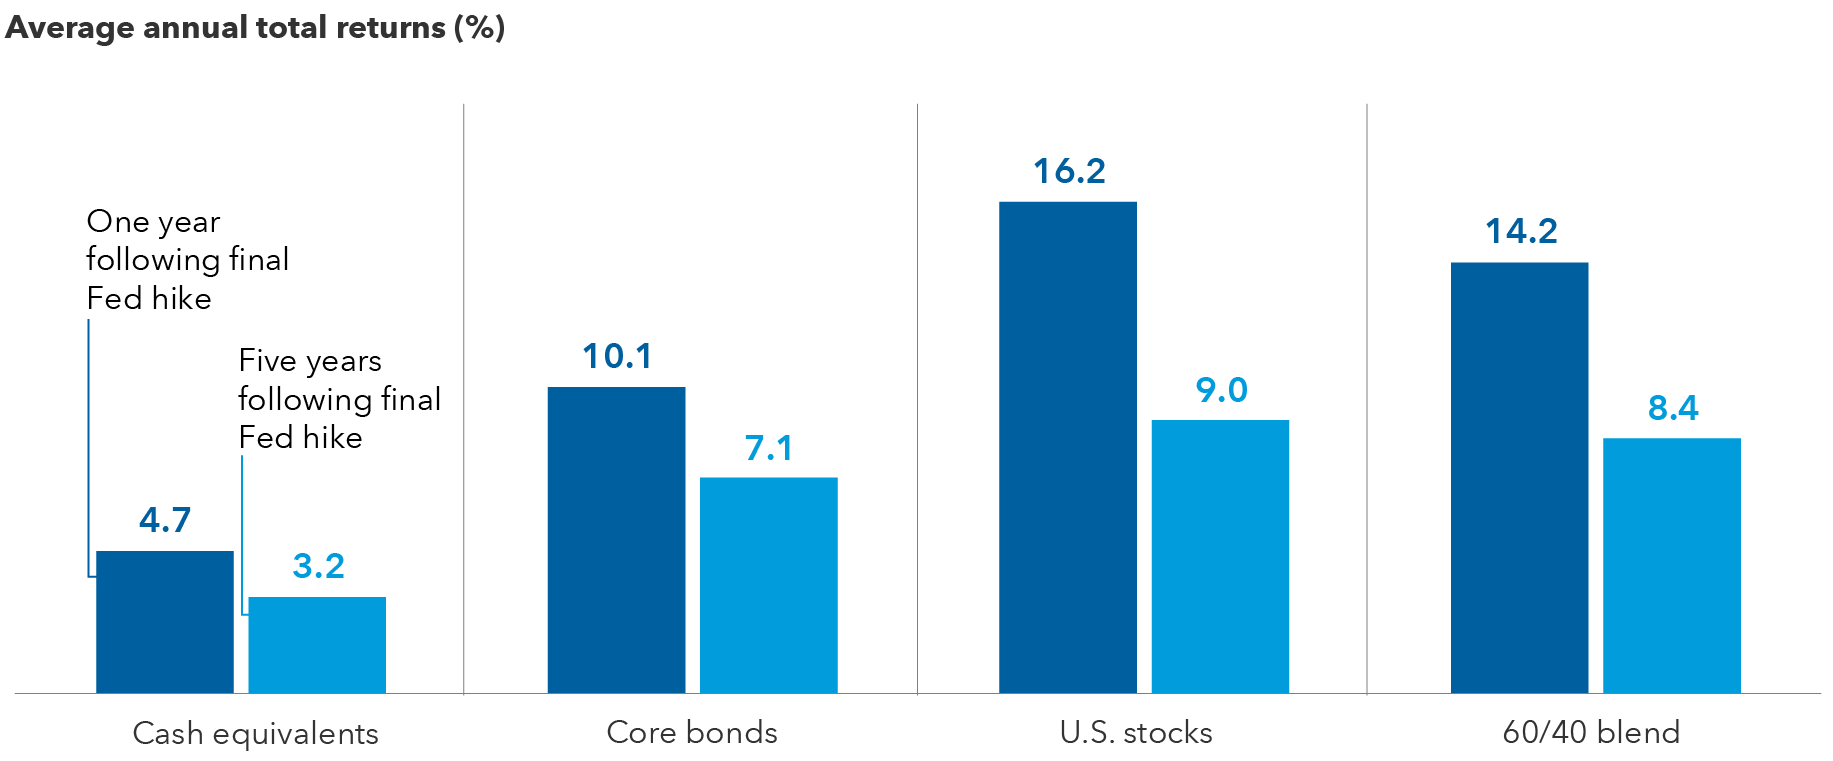 The image shows a bar chart with the historical returns of stocks and bonds after the conclusion of Fed rate-hiking cycles, and that they generally outpace cash equivalents over one- and five-year periods. The bottom scale lists cash equivalents, core bonds, U.S. stocks and a 60/40 blended portfolio. Core bonds returned 10.1% for the one-year period following a final Fed hike and 7.1% for the five-year period following a final Fed hike. U.S. stocks returned 16.2% for the one-year period and 9.0% for the five-year period. The 60/40 blend returned 14.2% for the one-year period and 8.4% for the five-year period. Cash equivalents returned 4.7% for the one-year period and 3.2% for the five-year period.